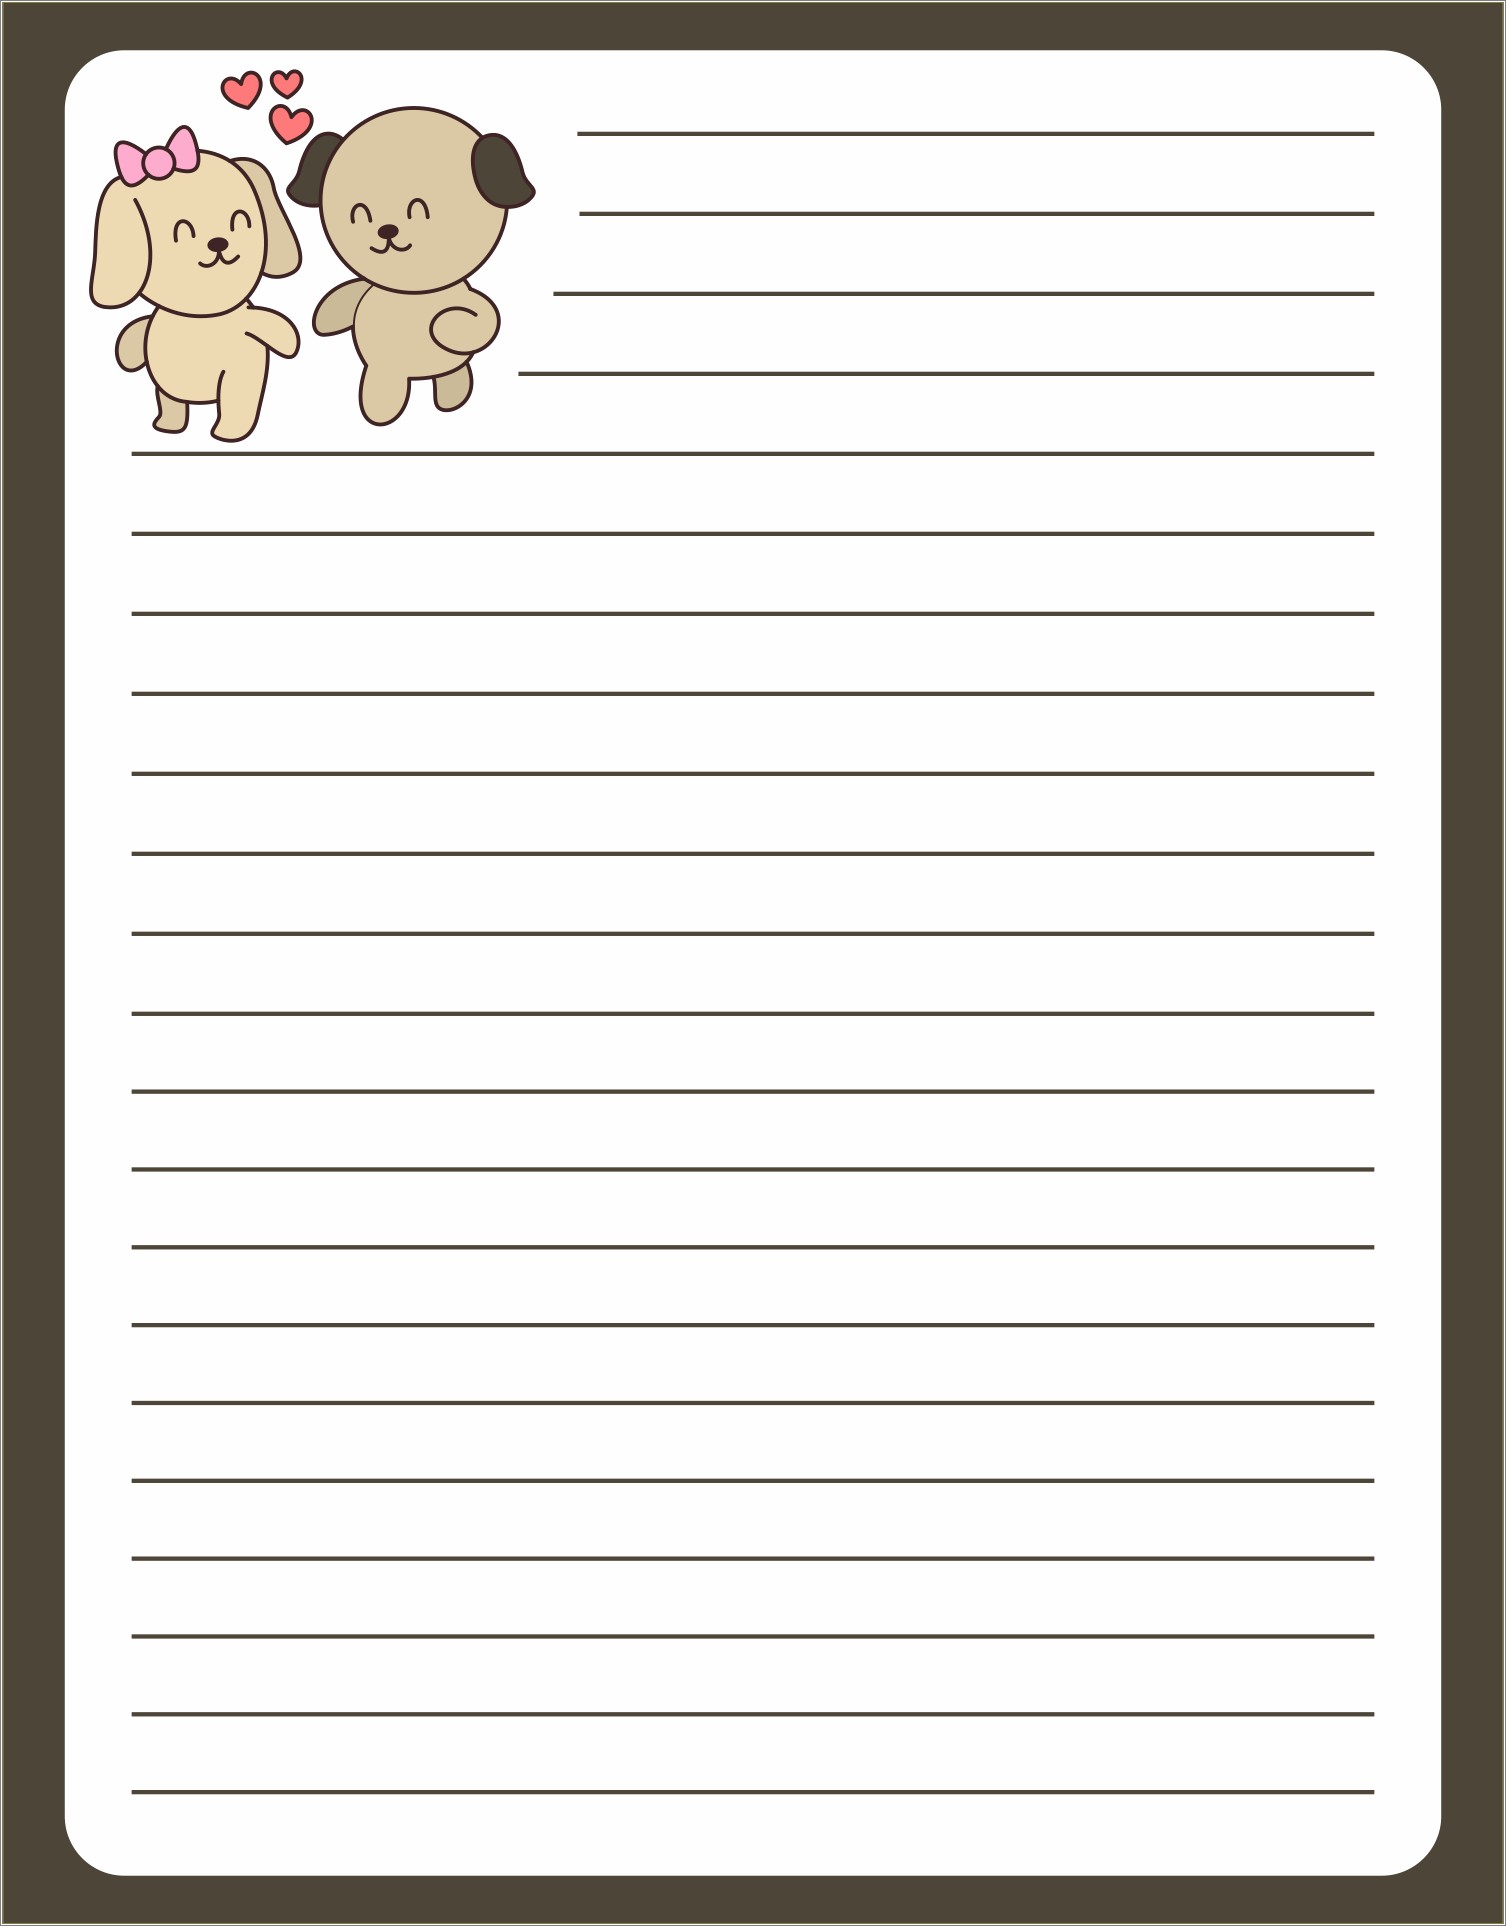 Bear Template With Lines For Wrioting Free